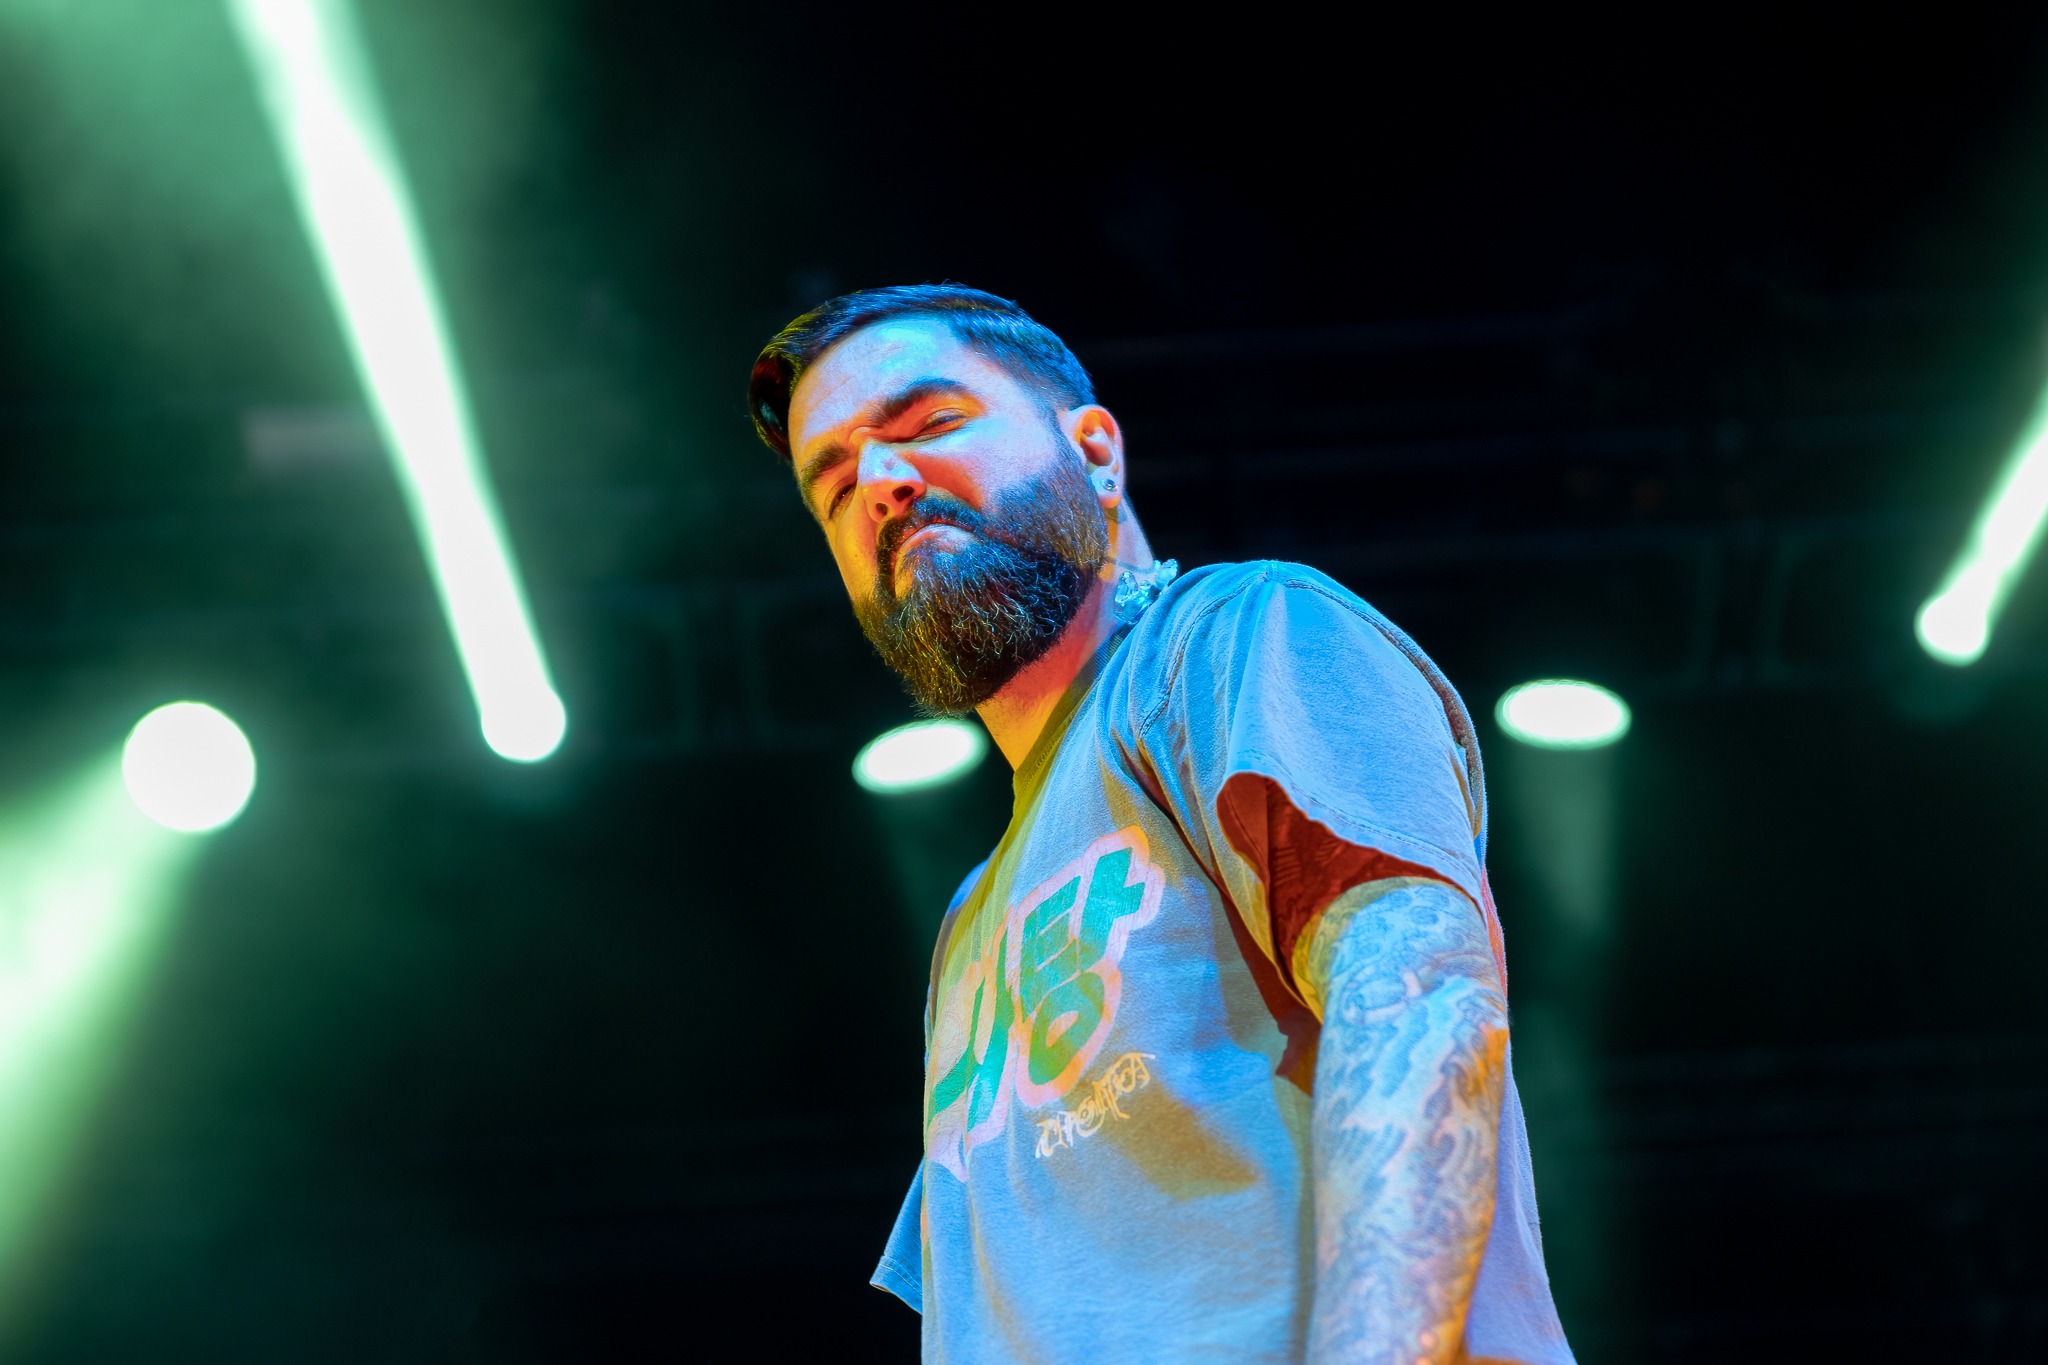 A Day to Remember perform at Moda Center Theater of the Clouds in Portland, Oregon on October 10, 2022.